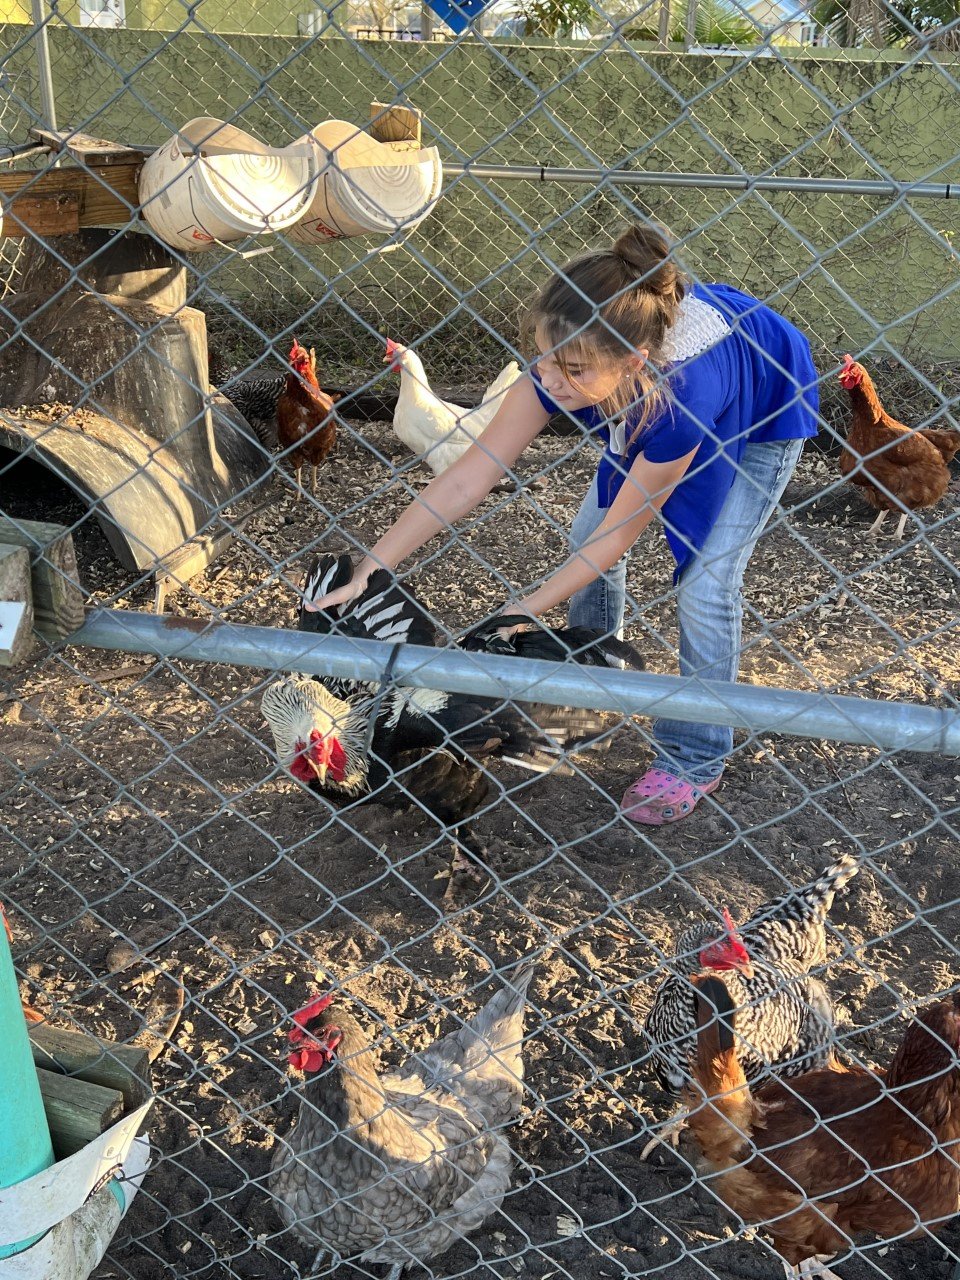 OKEECHOBEE -- Saraya stays busy taking care of the chickens and keeping the chicken coops clean. [Photo by Katrina Elsken/Lake Okeechobee News]